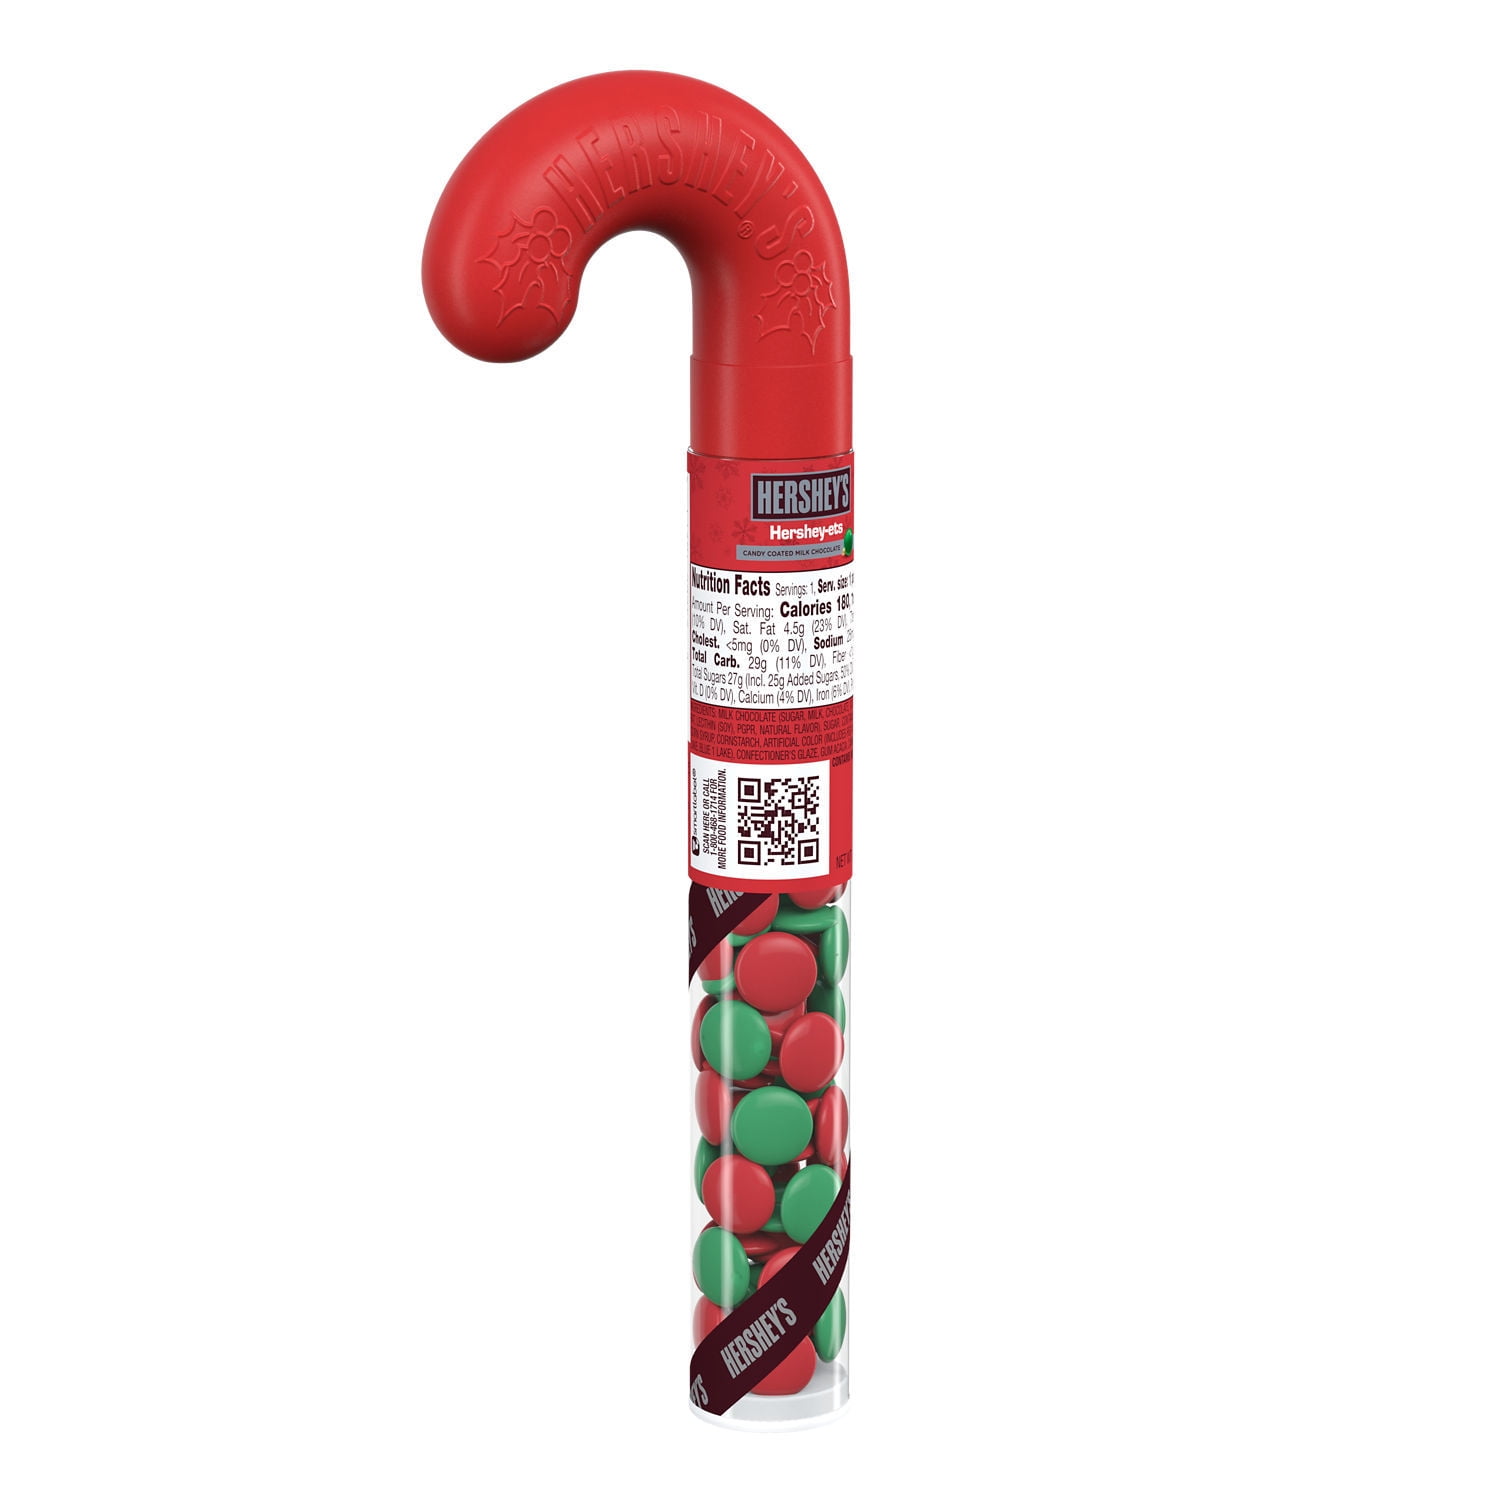 HERSHEY'S, HERSHEY-ETS Candy Coated Milk Chocolate Candy, Christmas, 1.4 oz, Filled Plastic Cane